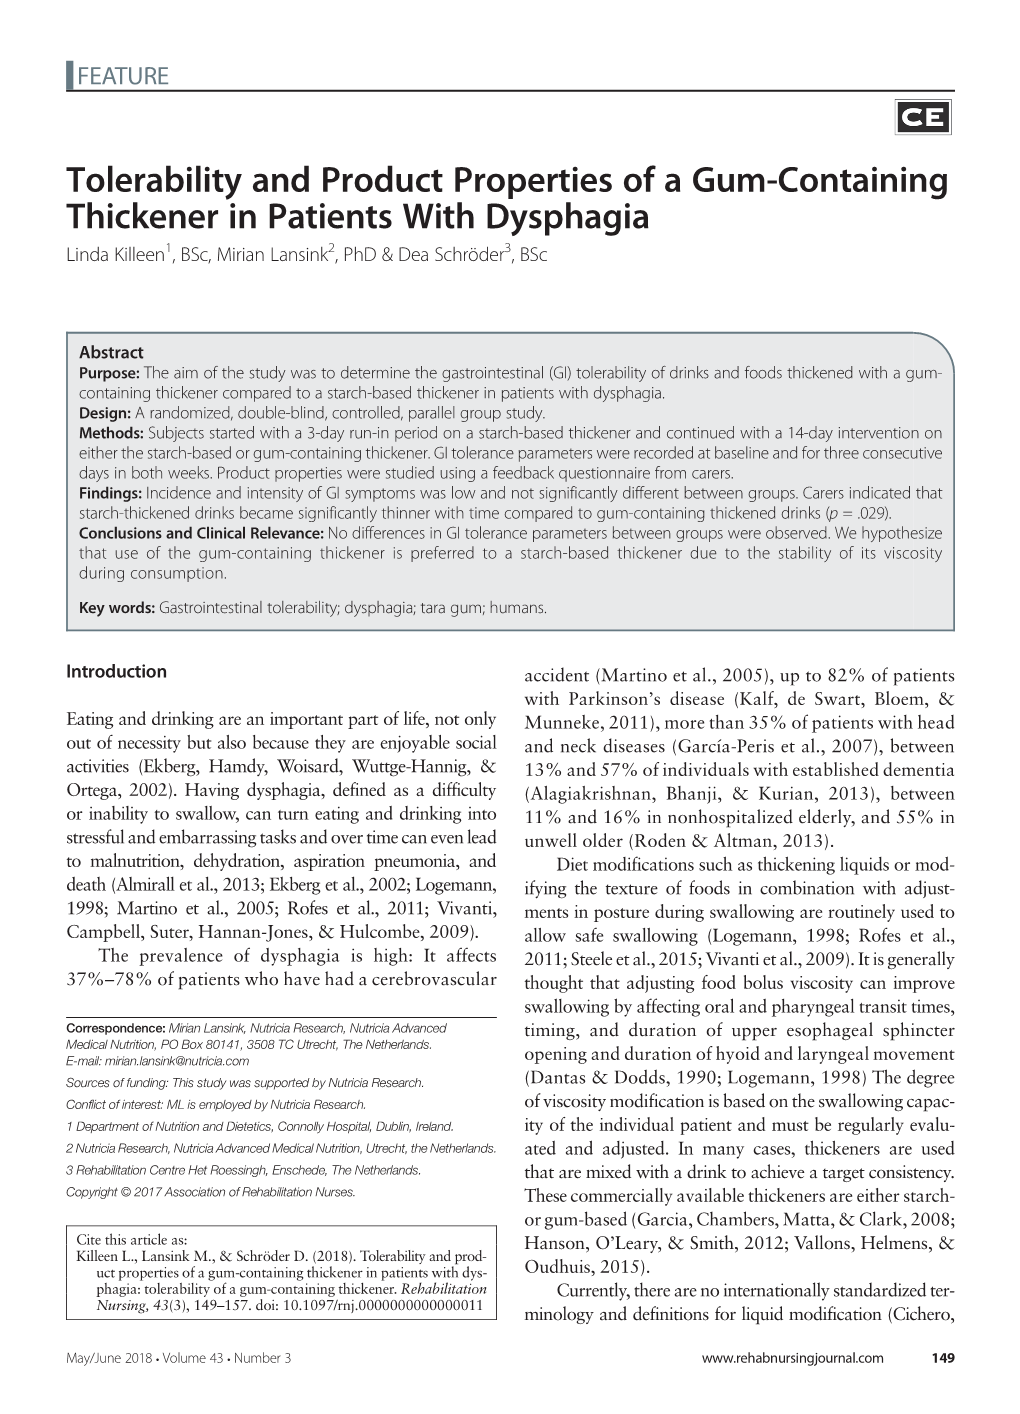 Tolerability and Product Properties of a Gum-Containing Thickener in Patients with Dysphagia Linda Killeen1,Bsc,Mirianlansink2, Phd & Dea Schröder3,Bsc